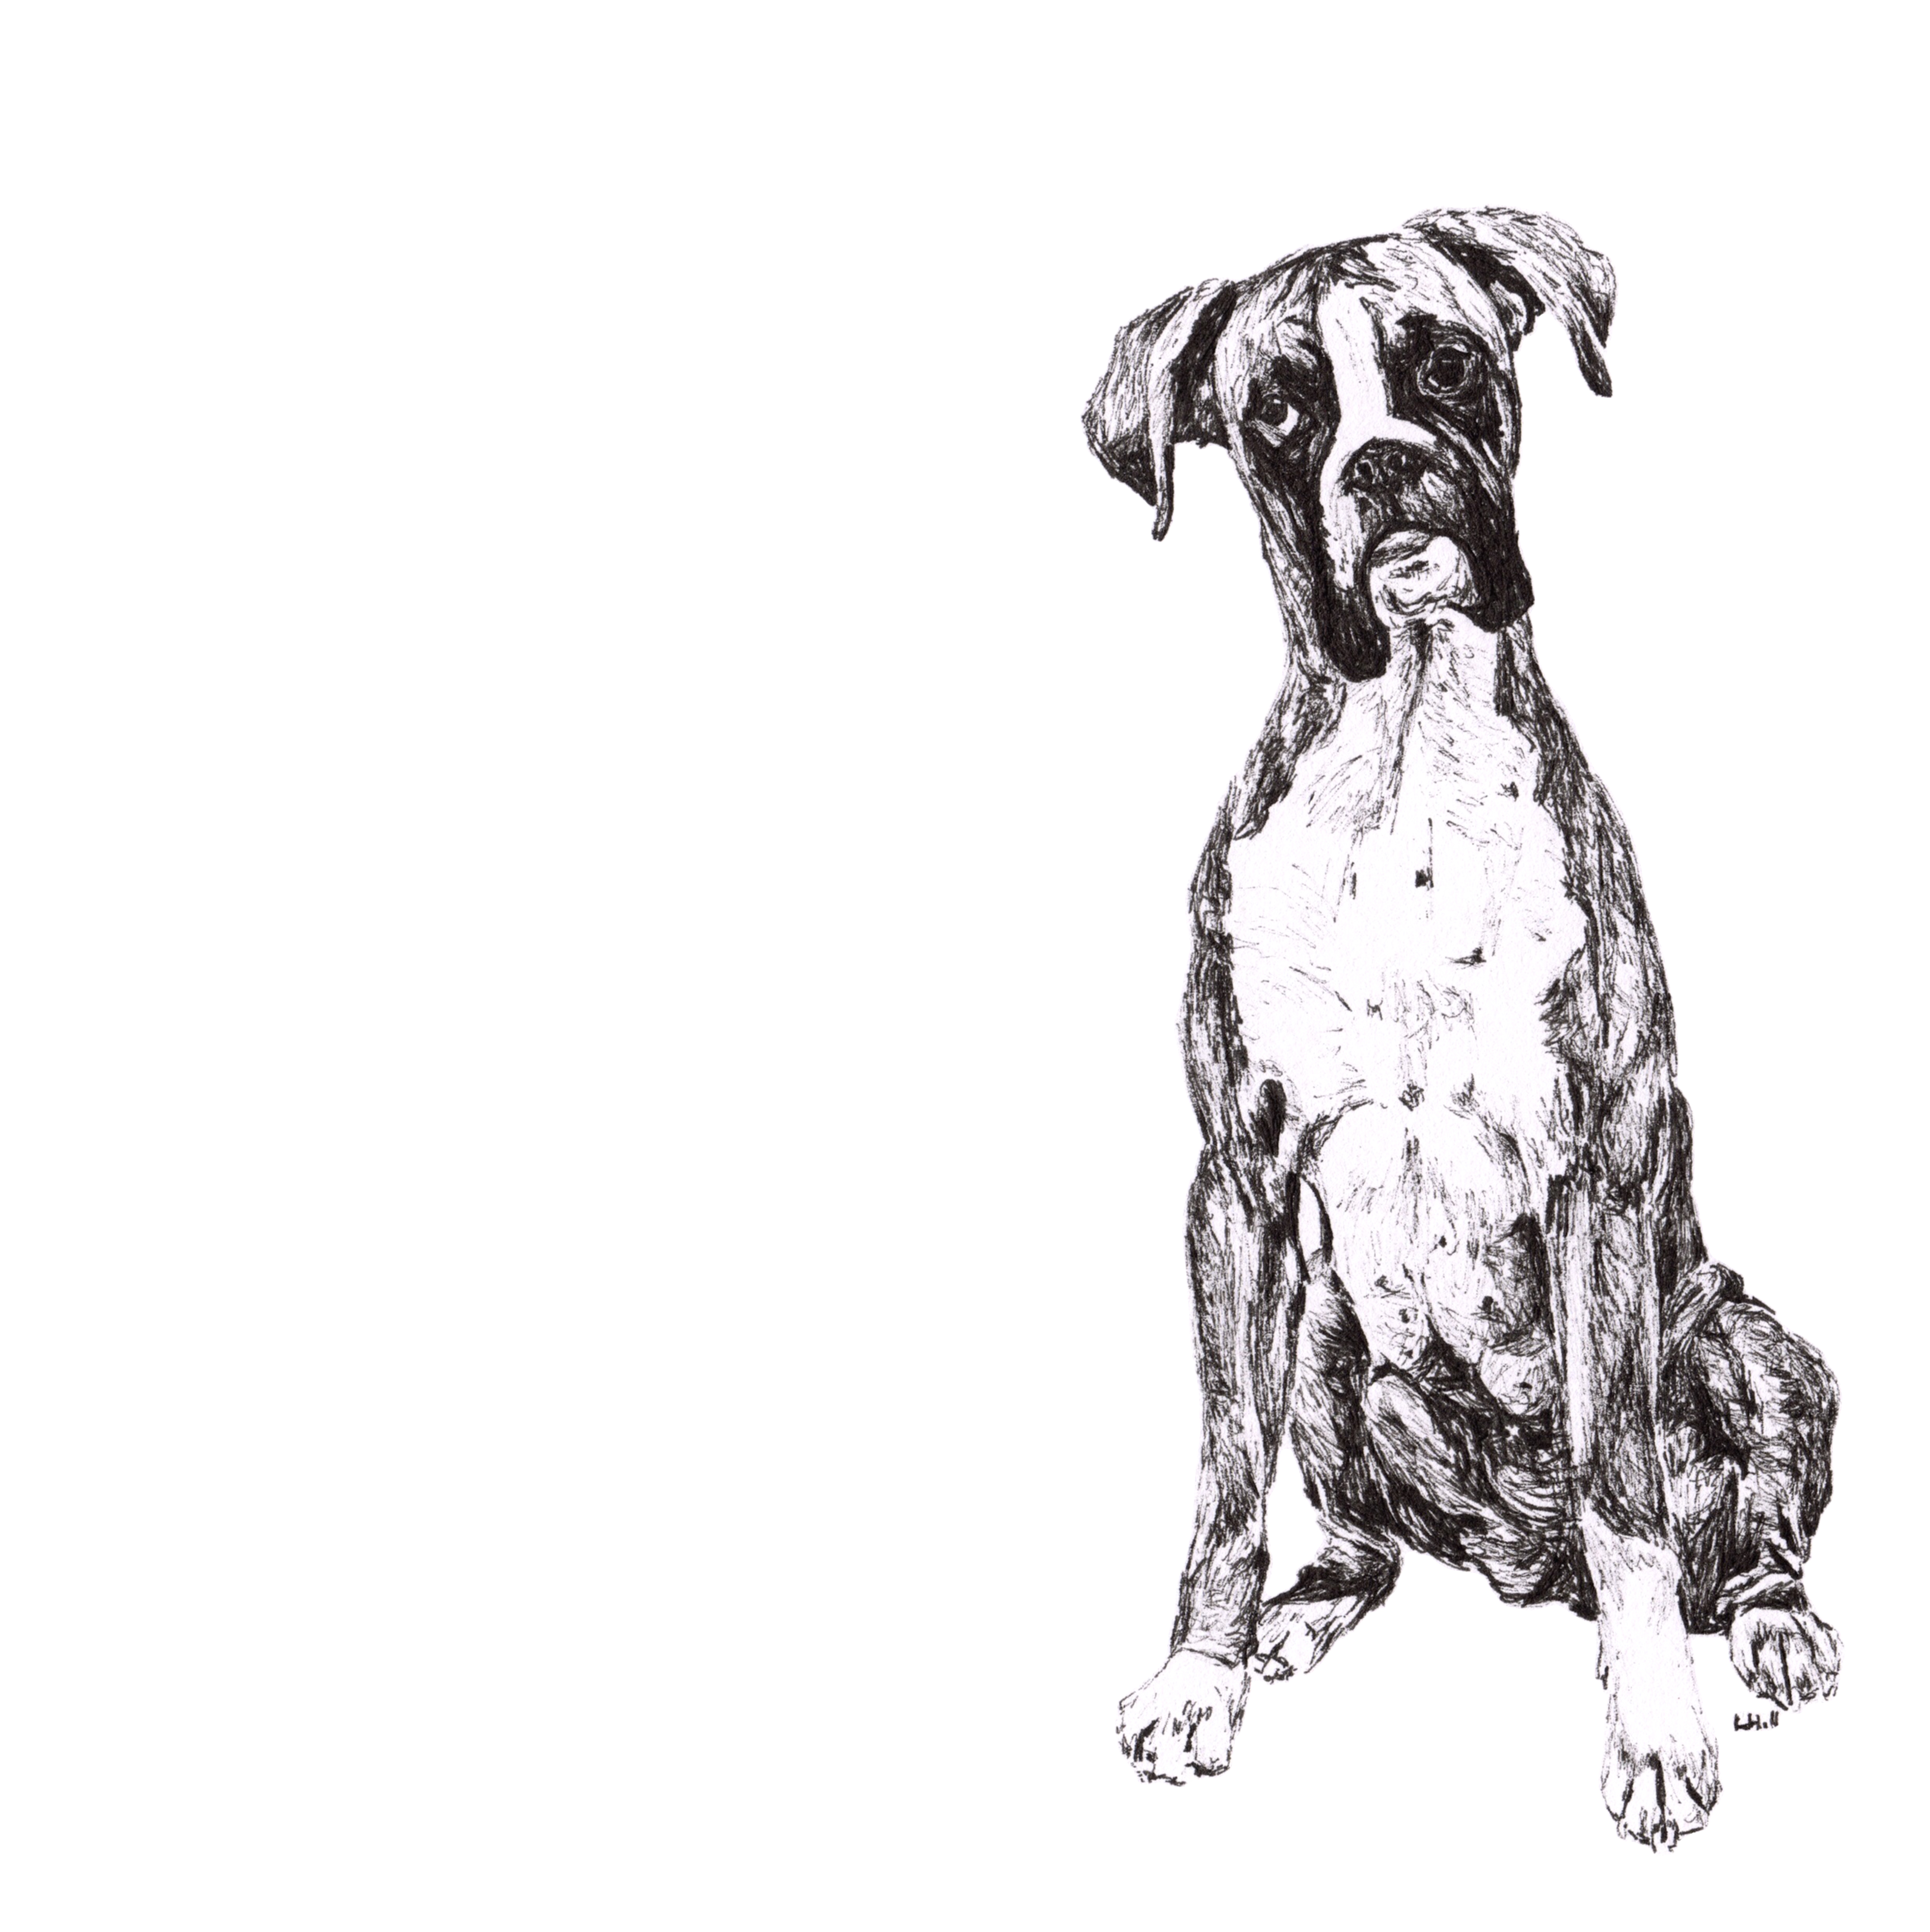 Boxer pen and ink illustration by Louisa Hill